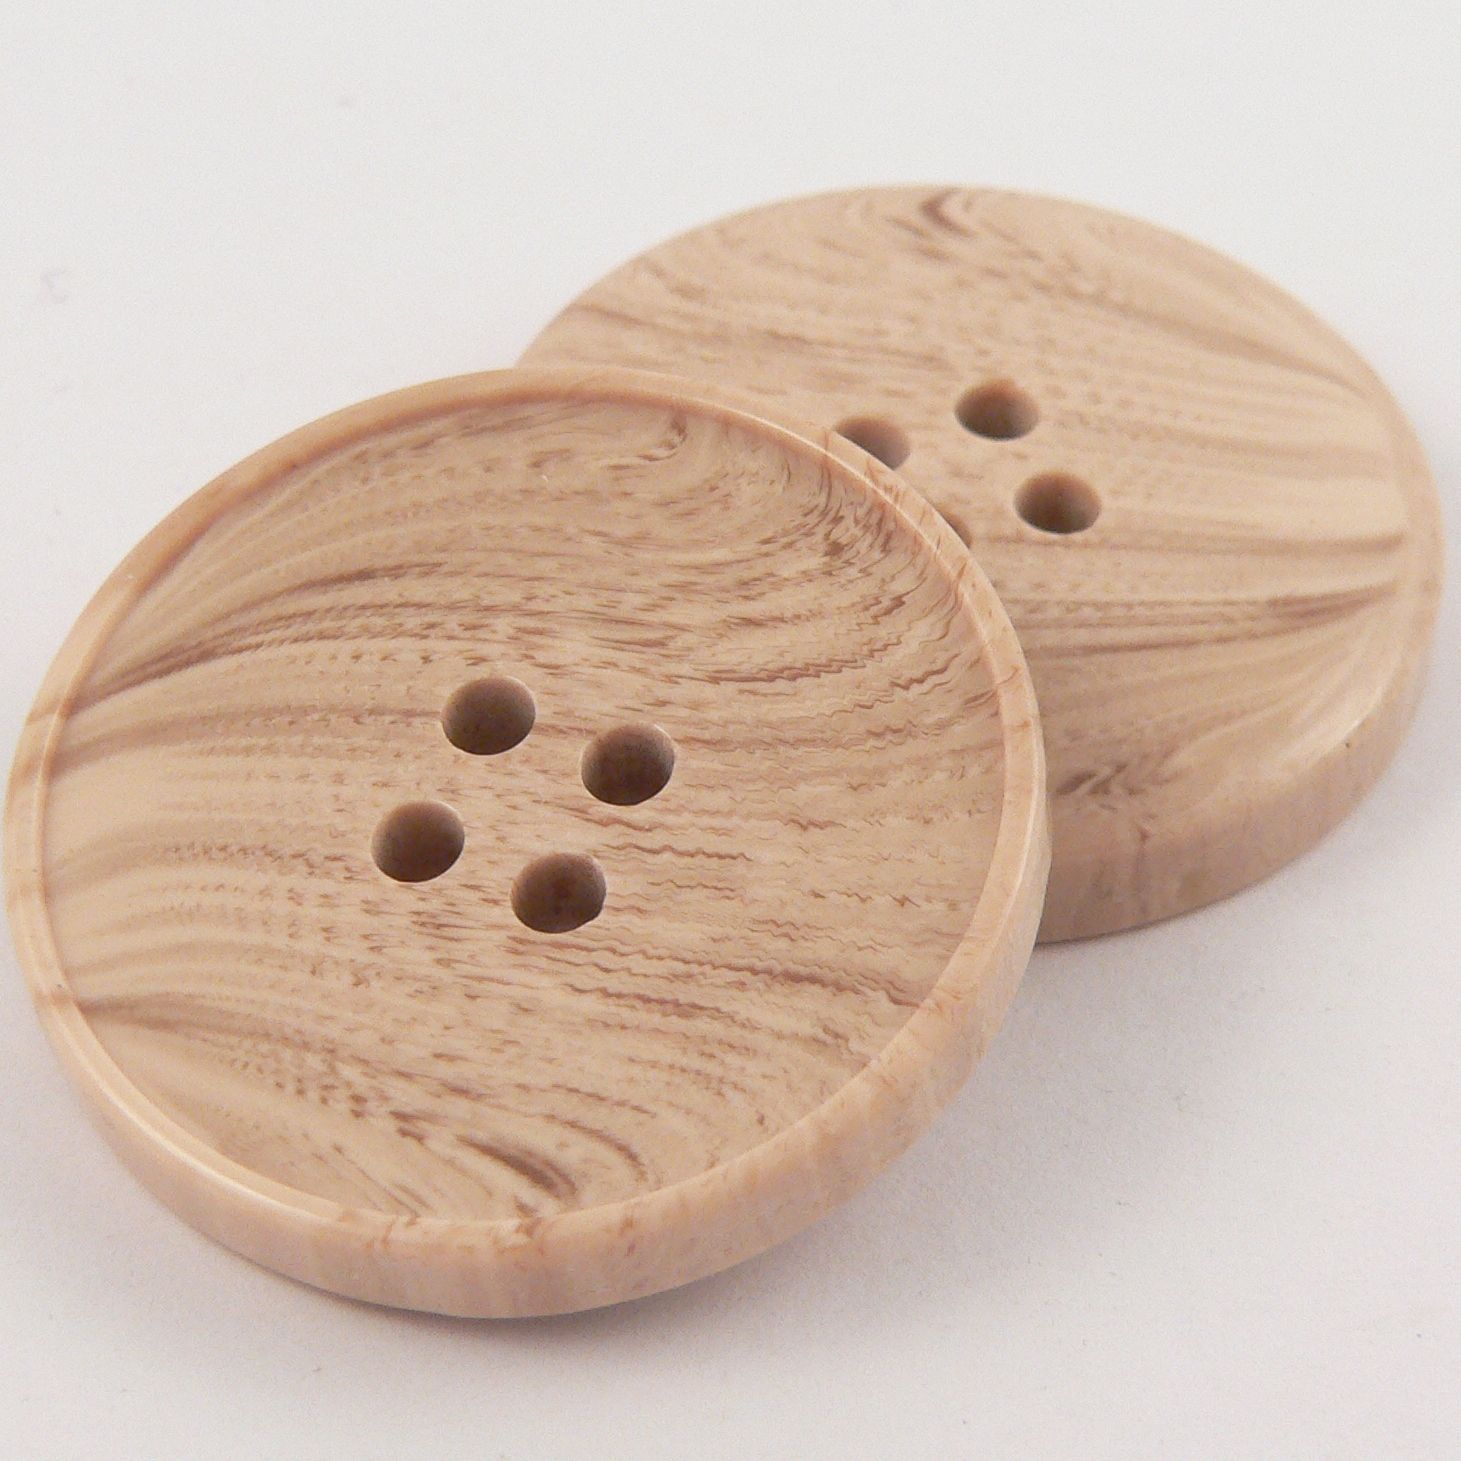 Wood Buttons, Wooden Buttons - Totally Buttons